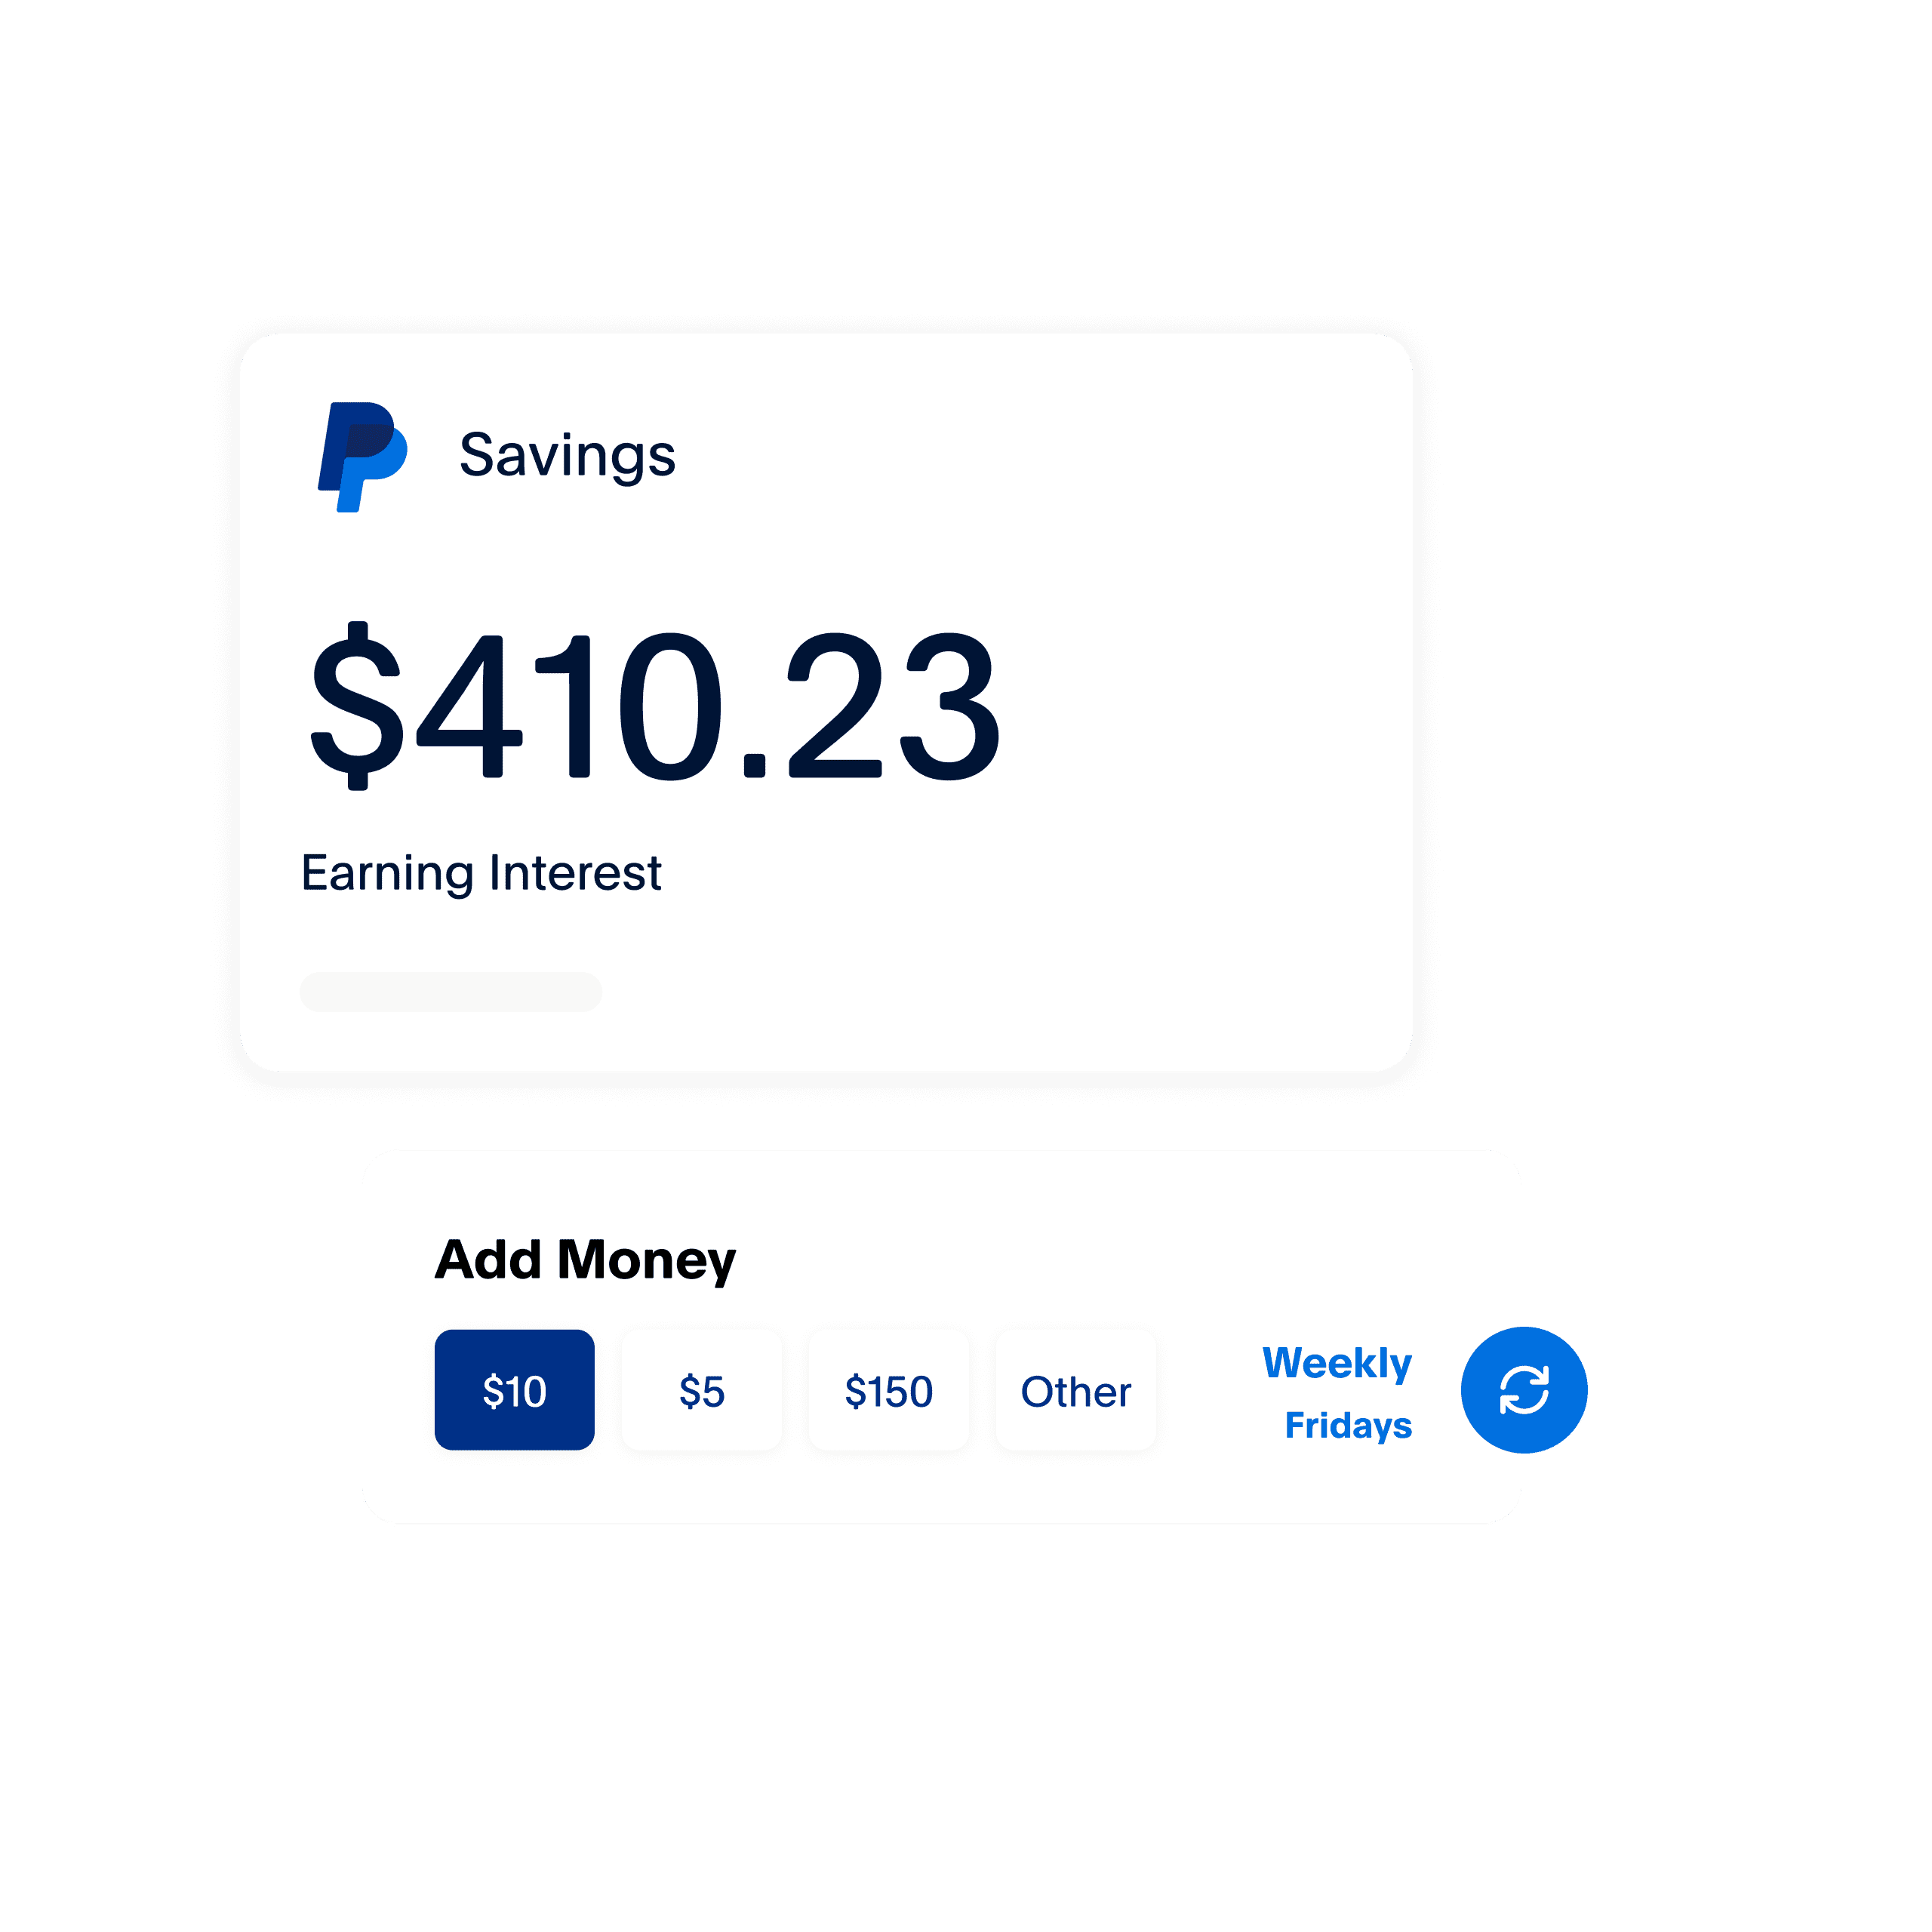 https://www.paypalobjects.com/marketing/web/US/en/rebrand/Manage-your-money/Savings-and-goals/savings_and_goals_graphic_split_savings_ui_ratio=1-1_for=all.png